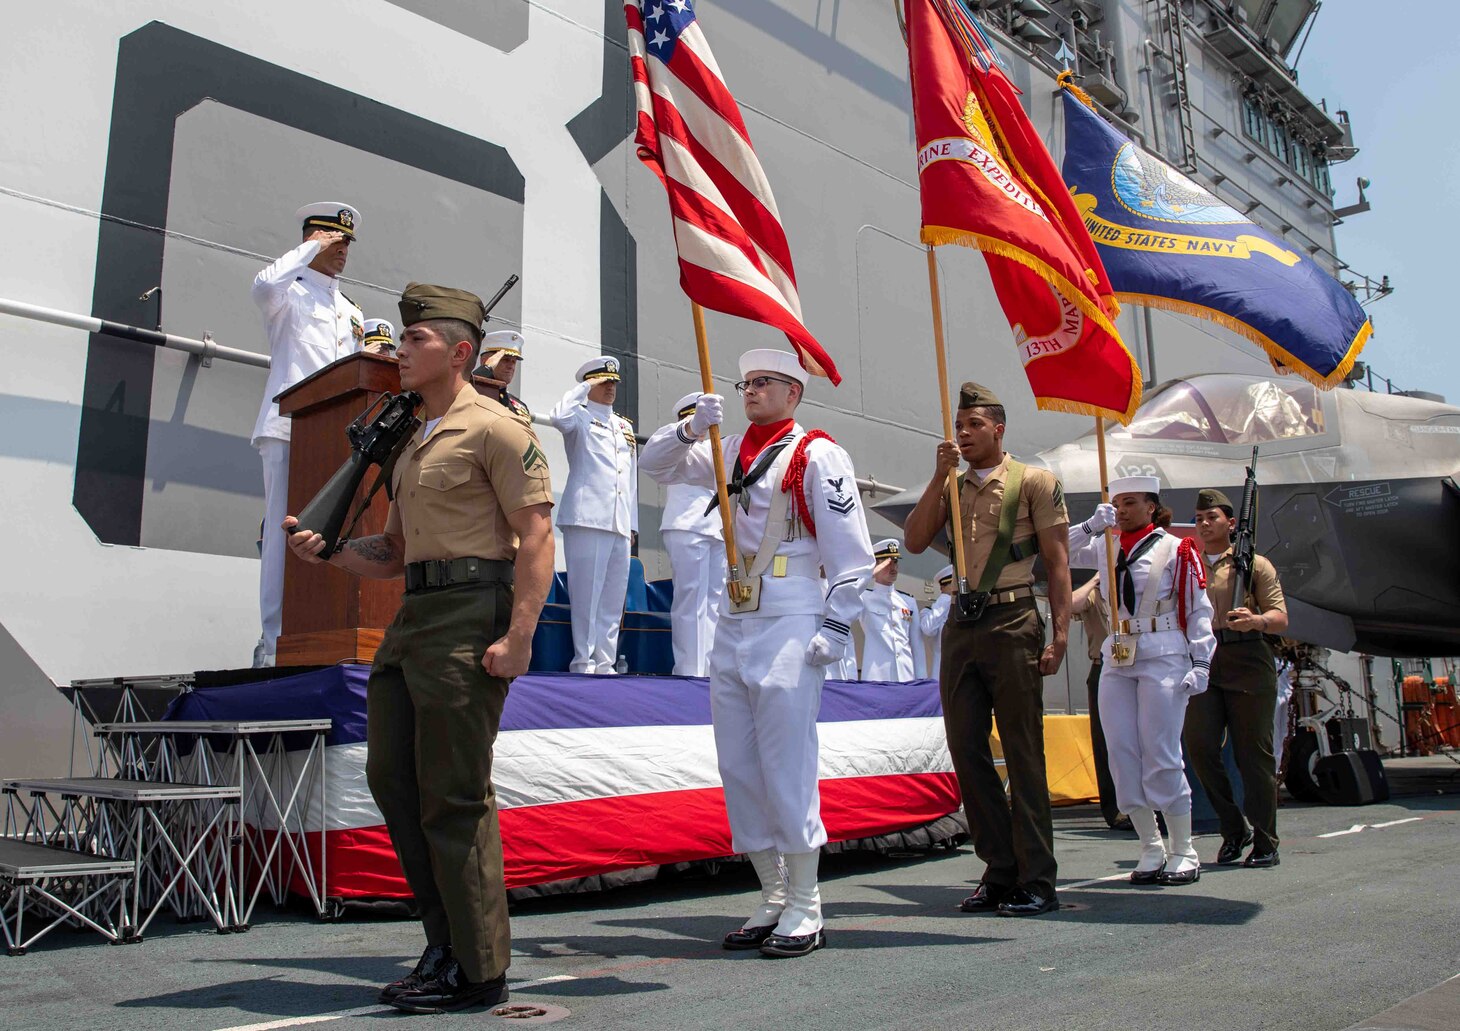 Sailors, and Marines assigned to the 13th Marine Expeditionary Unit (MEU) parade colors during a change of command ceremony on the flight deck of amphibious assault ship USS Makin Island (LHD 8), April 28, 2023 in the Philippines. The change of command ceremony is a time-honored naval tradition which formally proclaims the continuity and authority of command to the officers, men and women of the command. The Makin Island Amphibious Ready Group, comprised of Makin Island and amphibious transport dock USS Anchorage (LPD 23) and USS John P. Murtha (LPD 26), is operating in the U.S. 7th Fleet area of operations with the embarked 13th MEU to enhance interoperability with Allies and partners and serve as a ready-response force to defend peace and maintain stability in the Indo-Pacific region.